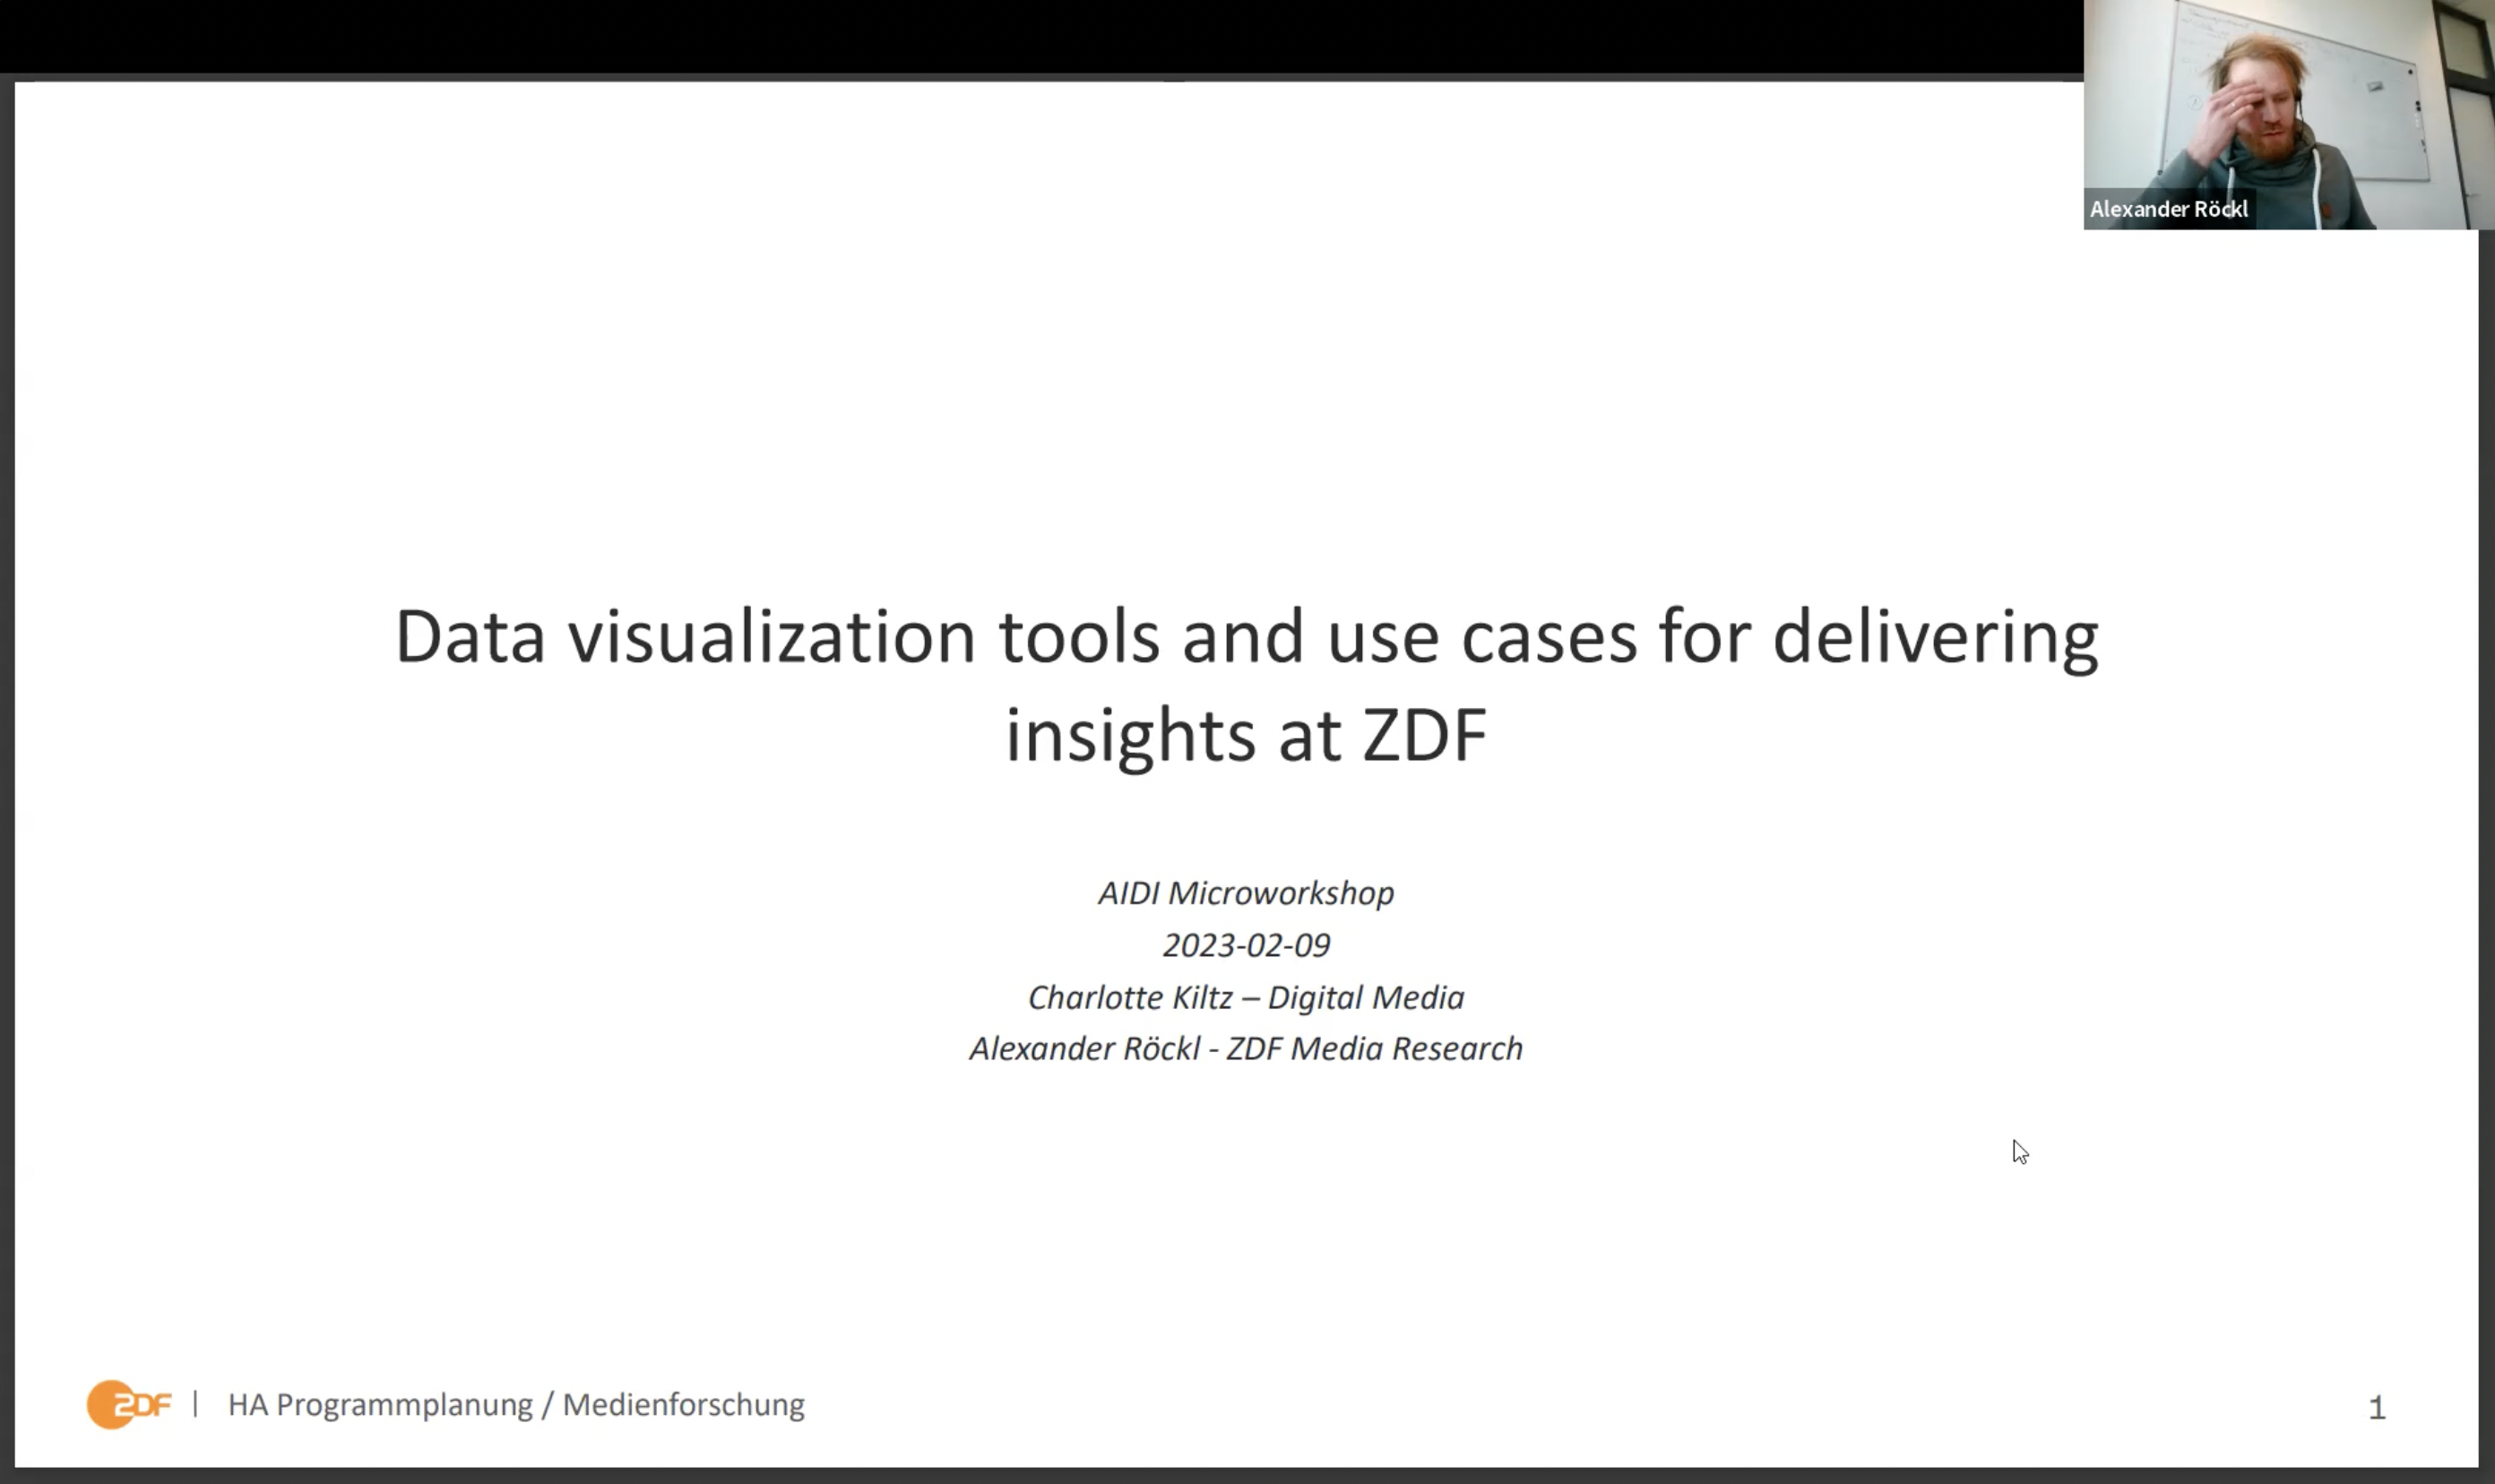 Data visualization tools and use cases for delivering insights in ZDF